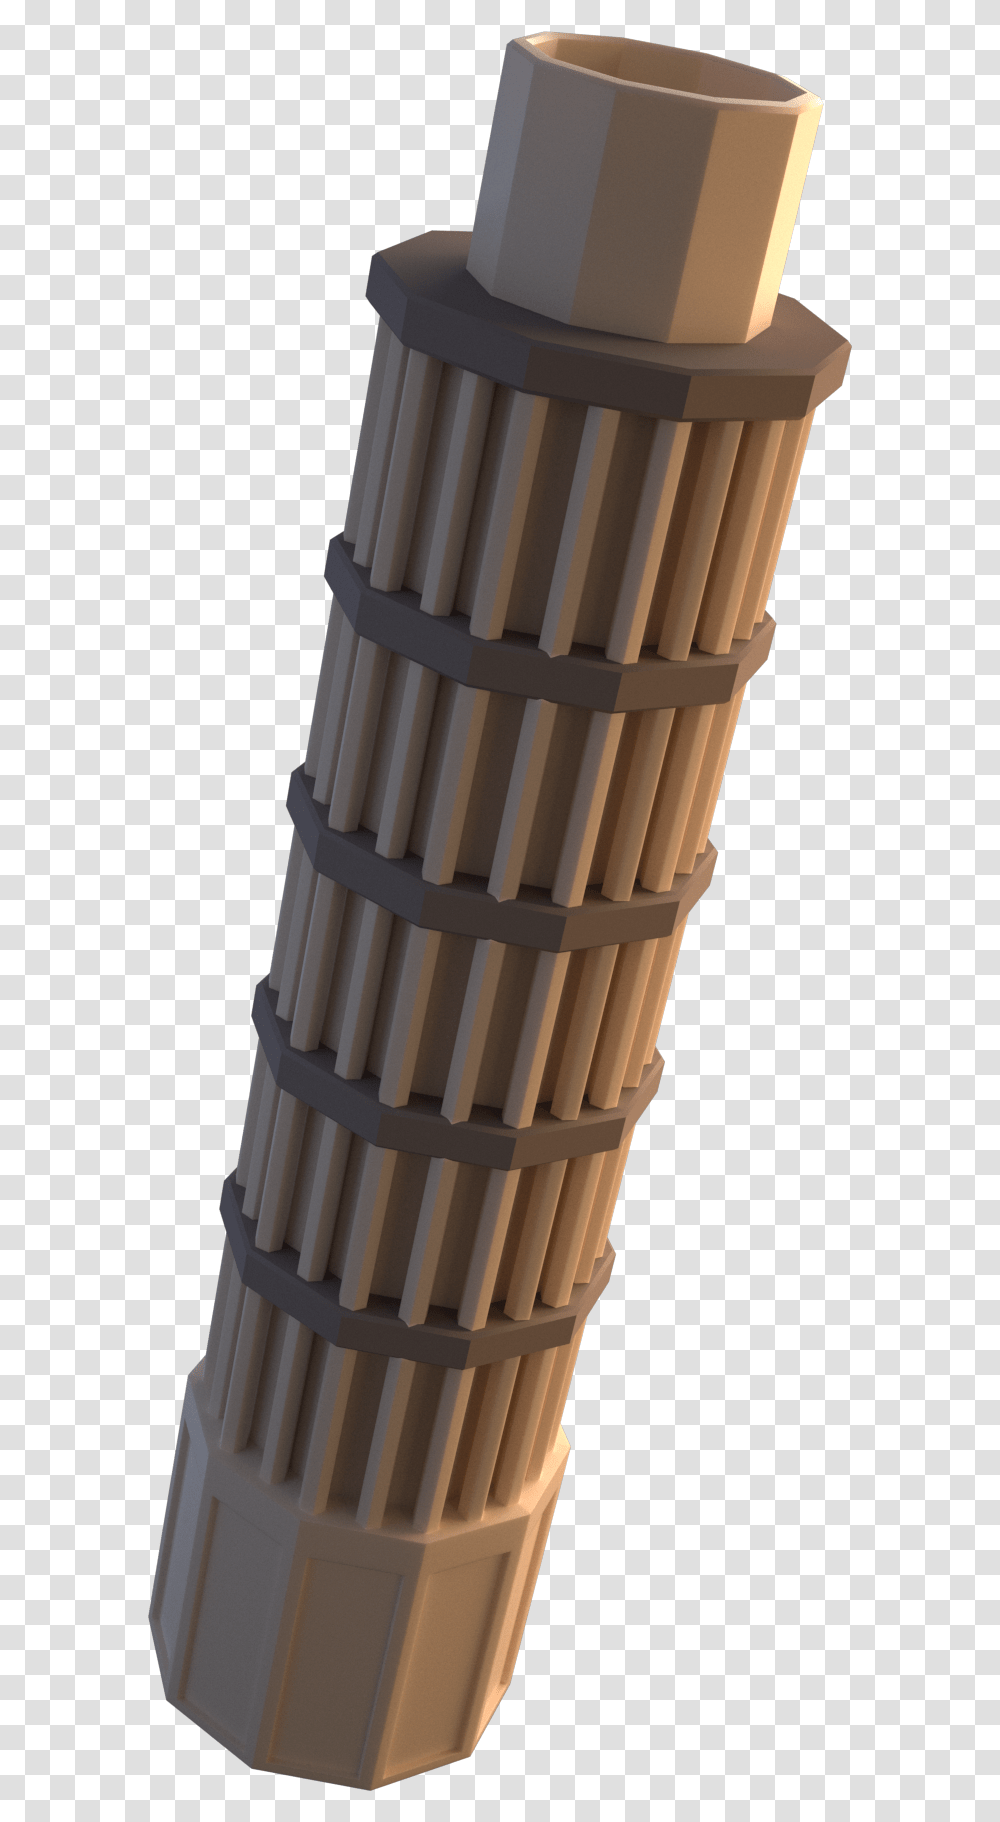 Extra Pisa Tower Atw Thumbnail Torch, Architecture, Building, Wedding Cake, Dessert Transparent Png